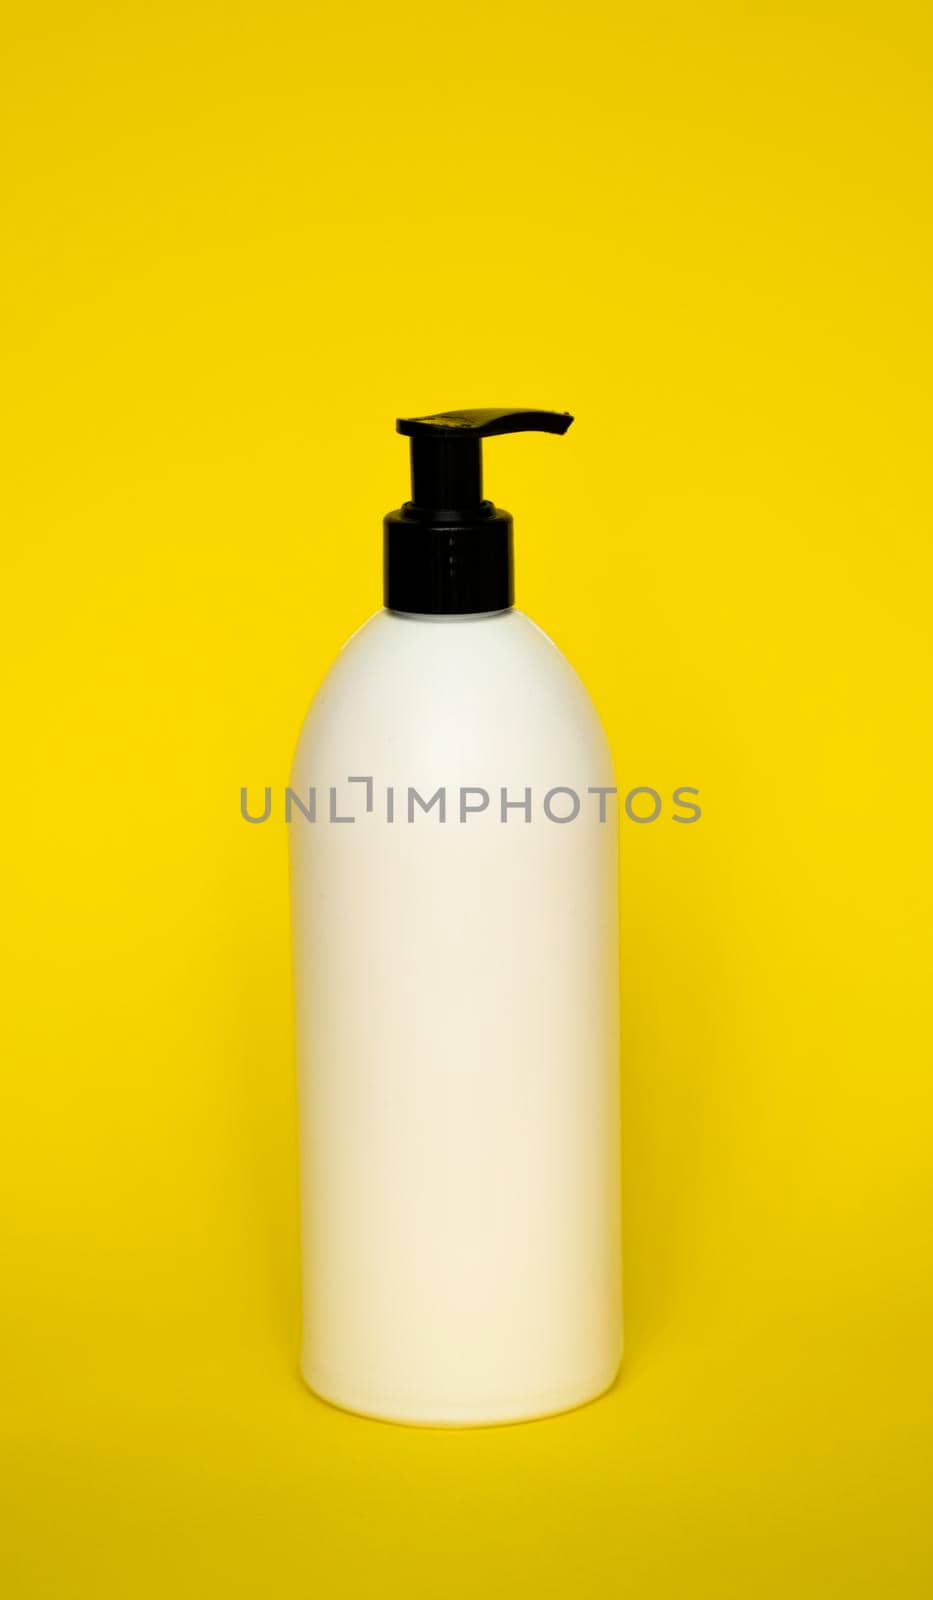 White plastic soap dispenser pump bottle isolated on yellow background. Skin care lotion. Bathing essential product. Shampoo bottle. Bath and body lotion. Fine liquid hand wash. Bathroom accessories